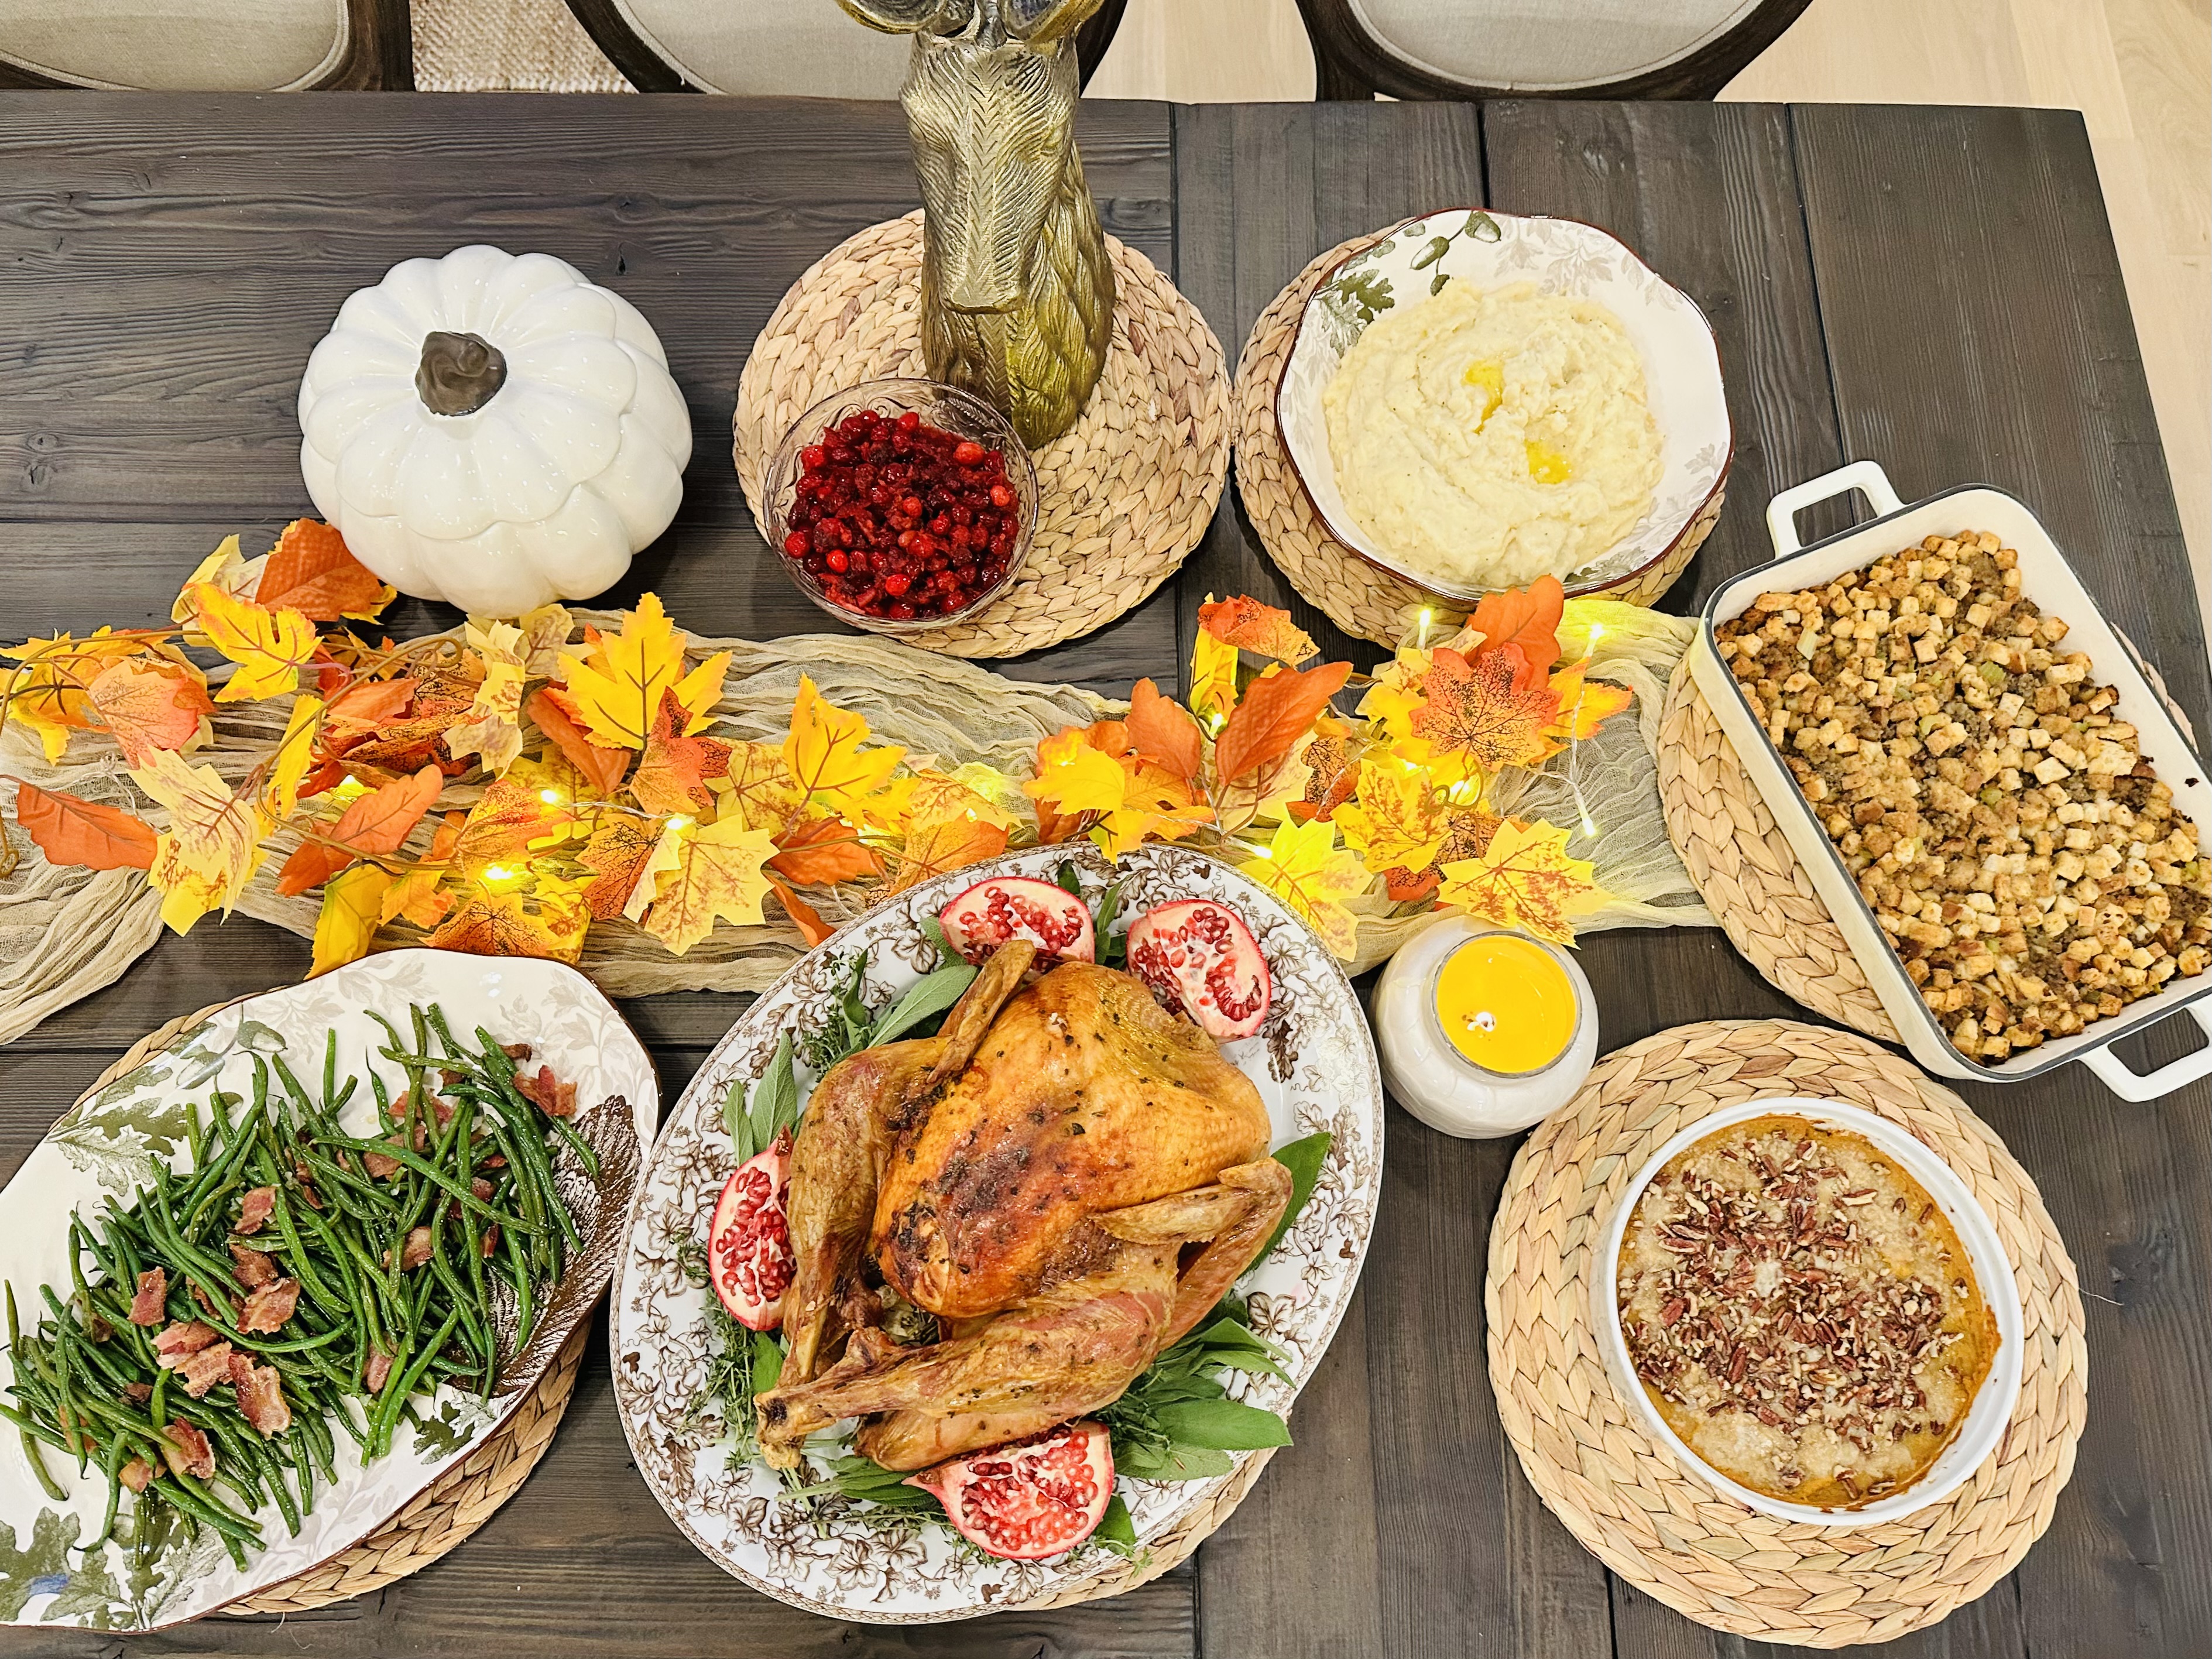 Thanksgiving Dinner 2022 – Favorite recipes from The Empty Nesters Kitchen